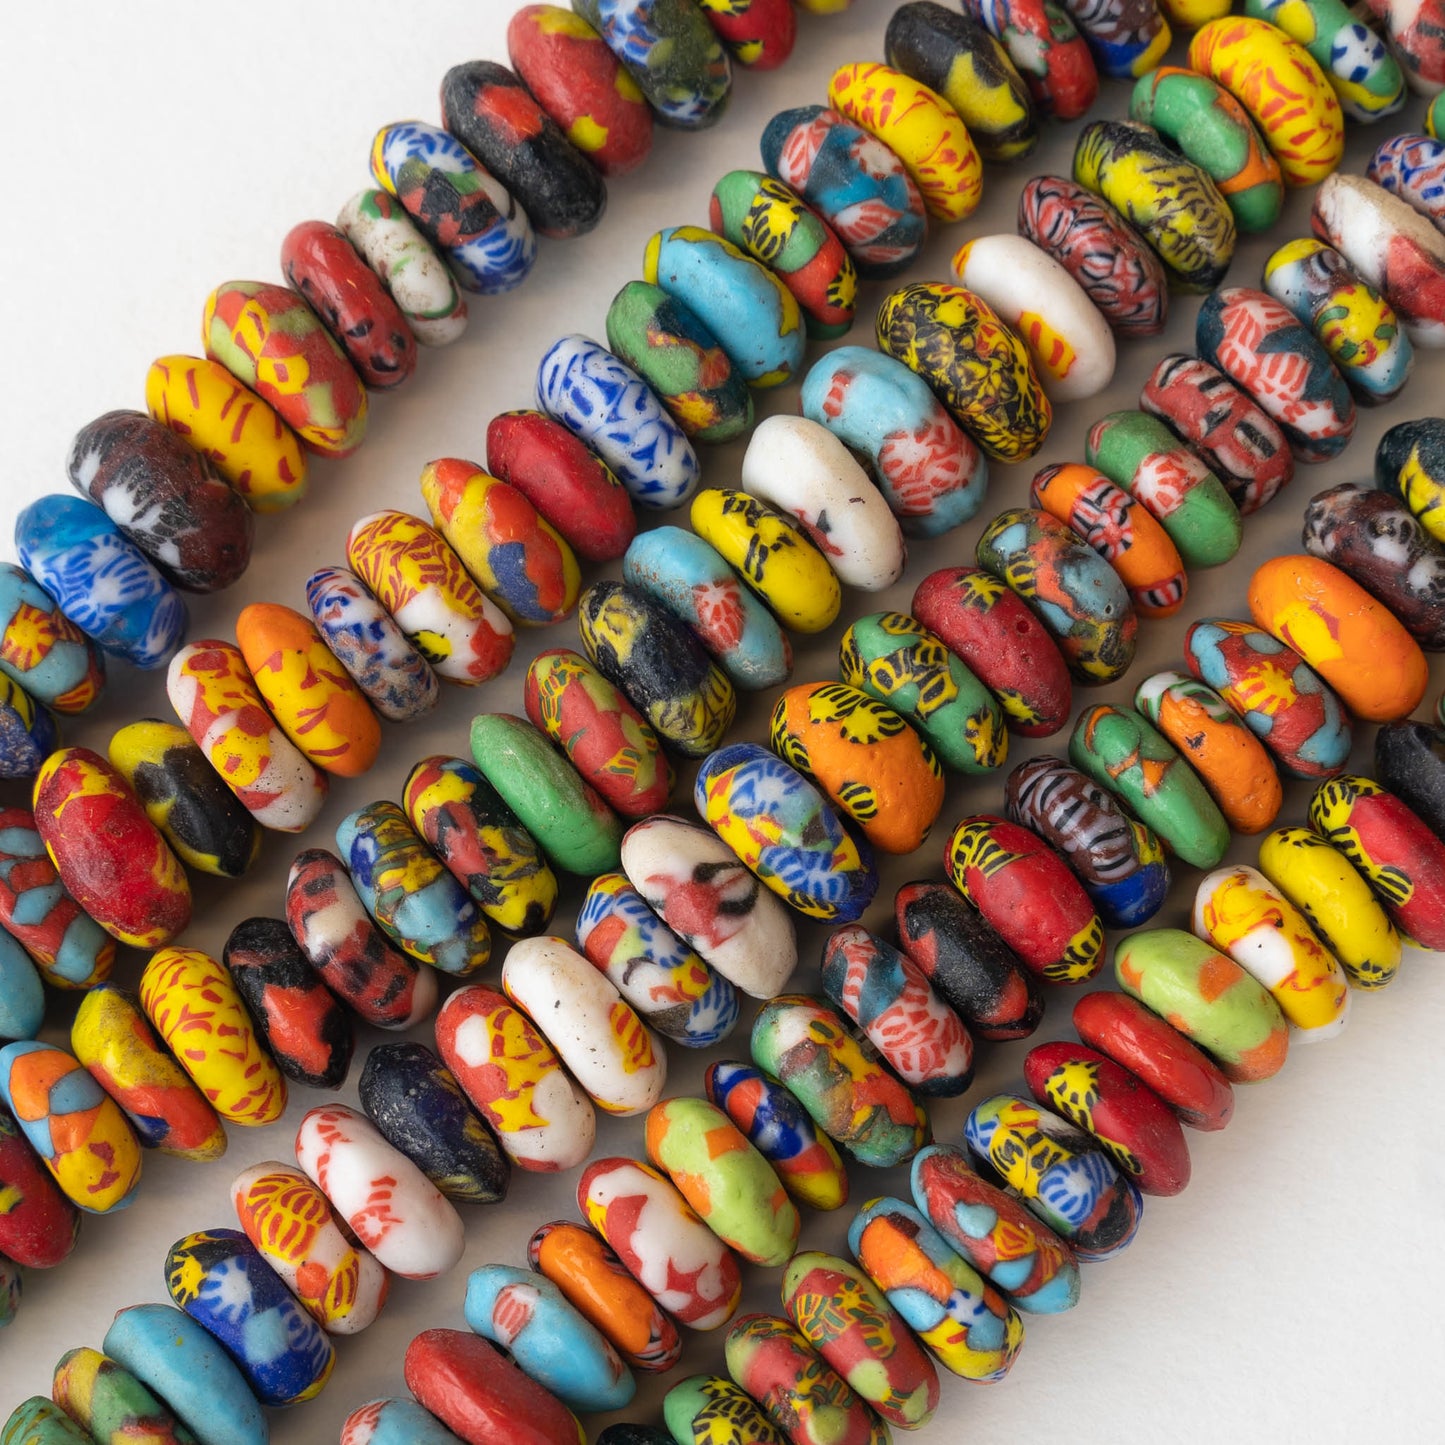 ON SALE African Mixed Beads: 2 Pounds